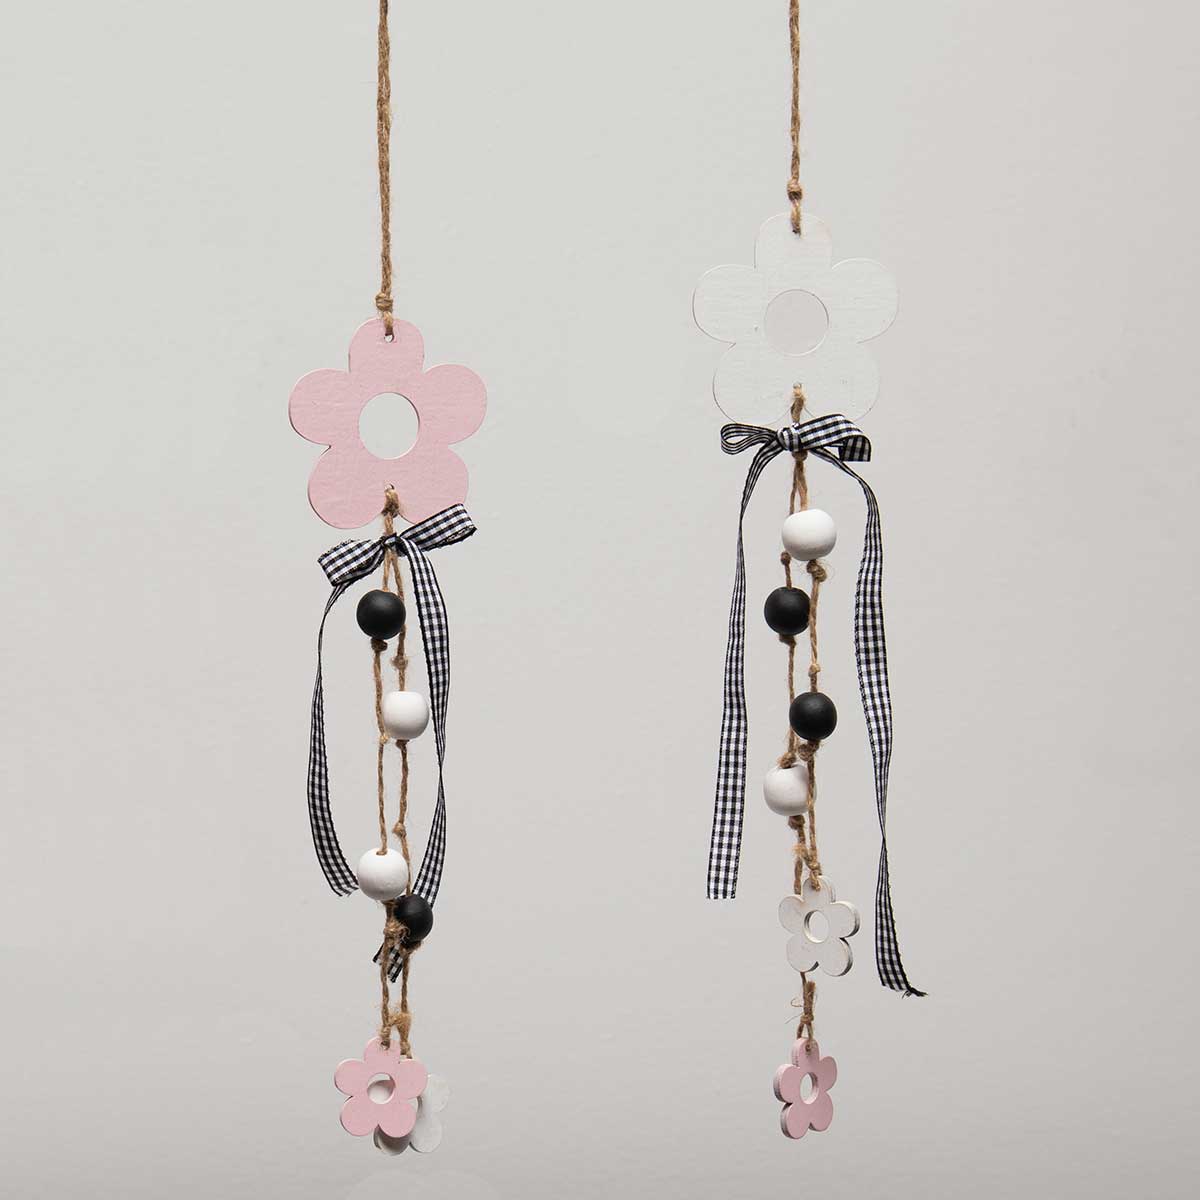 !FLOWER WOODEN HANG-UPS WITH PLAID BOW, TWINE AND BEADS